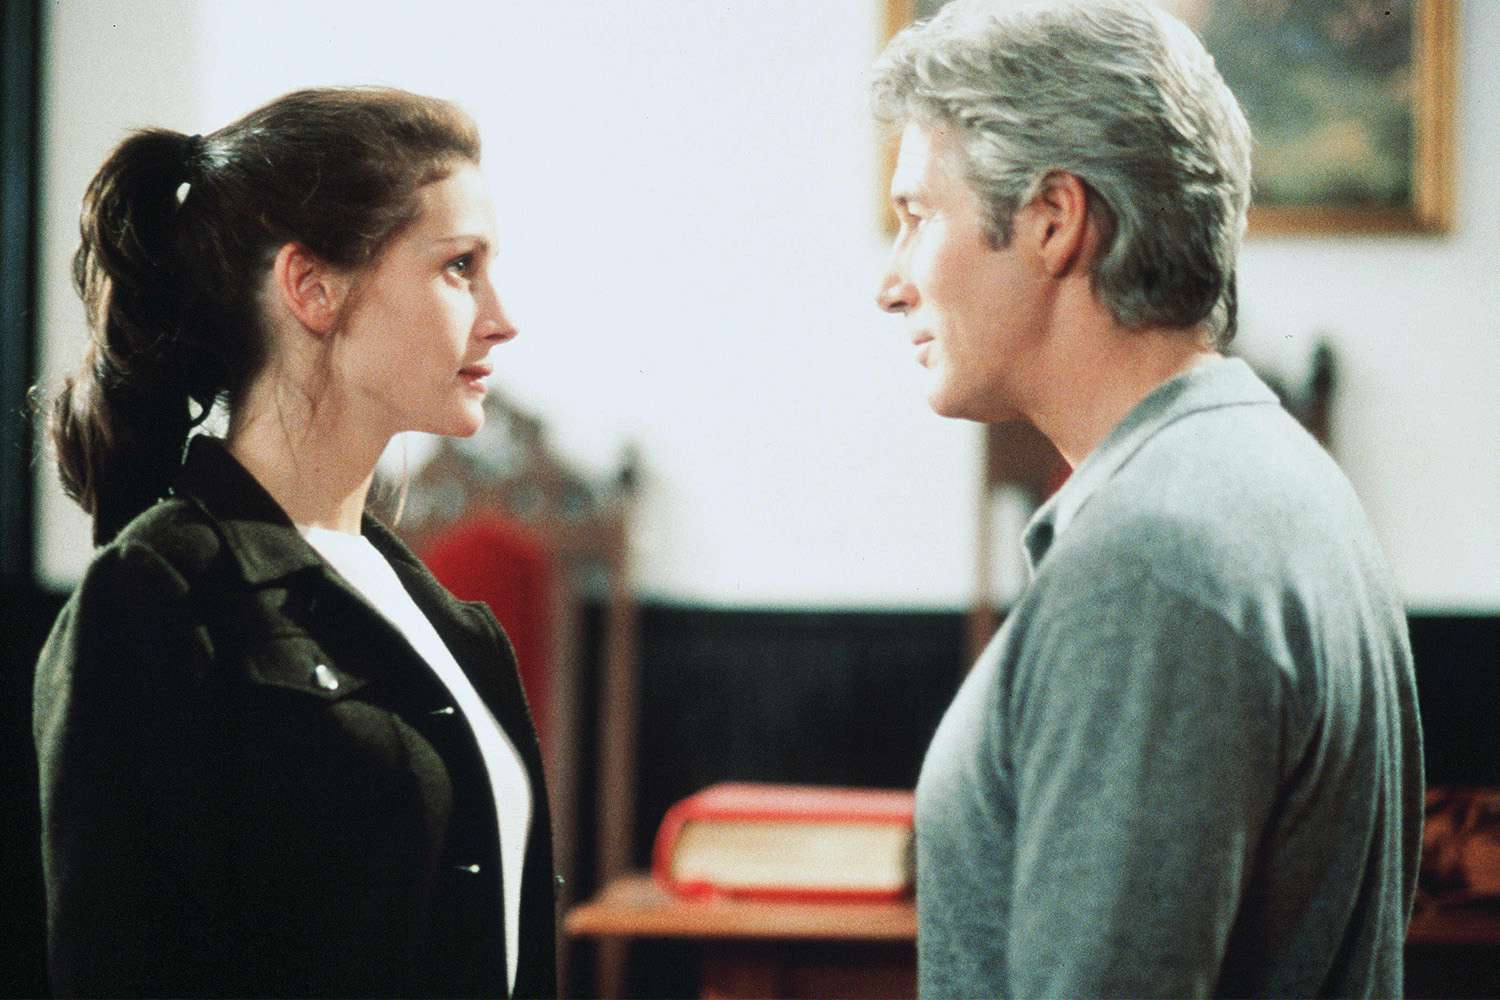 Runaway Bride Turns 25! Inside Julia Roberts and Richard Gere's Sweet Friendship Over the Years